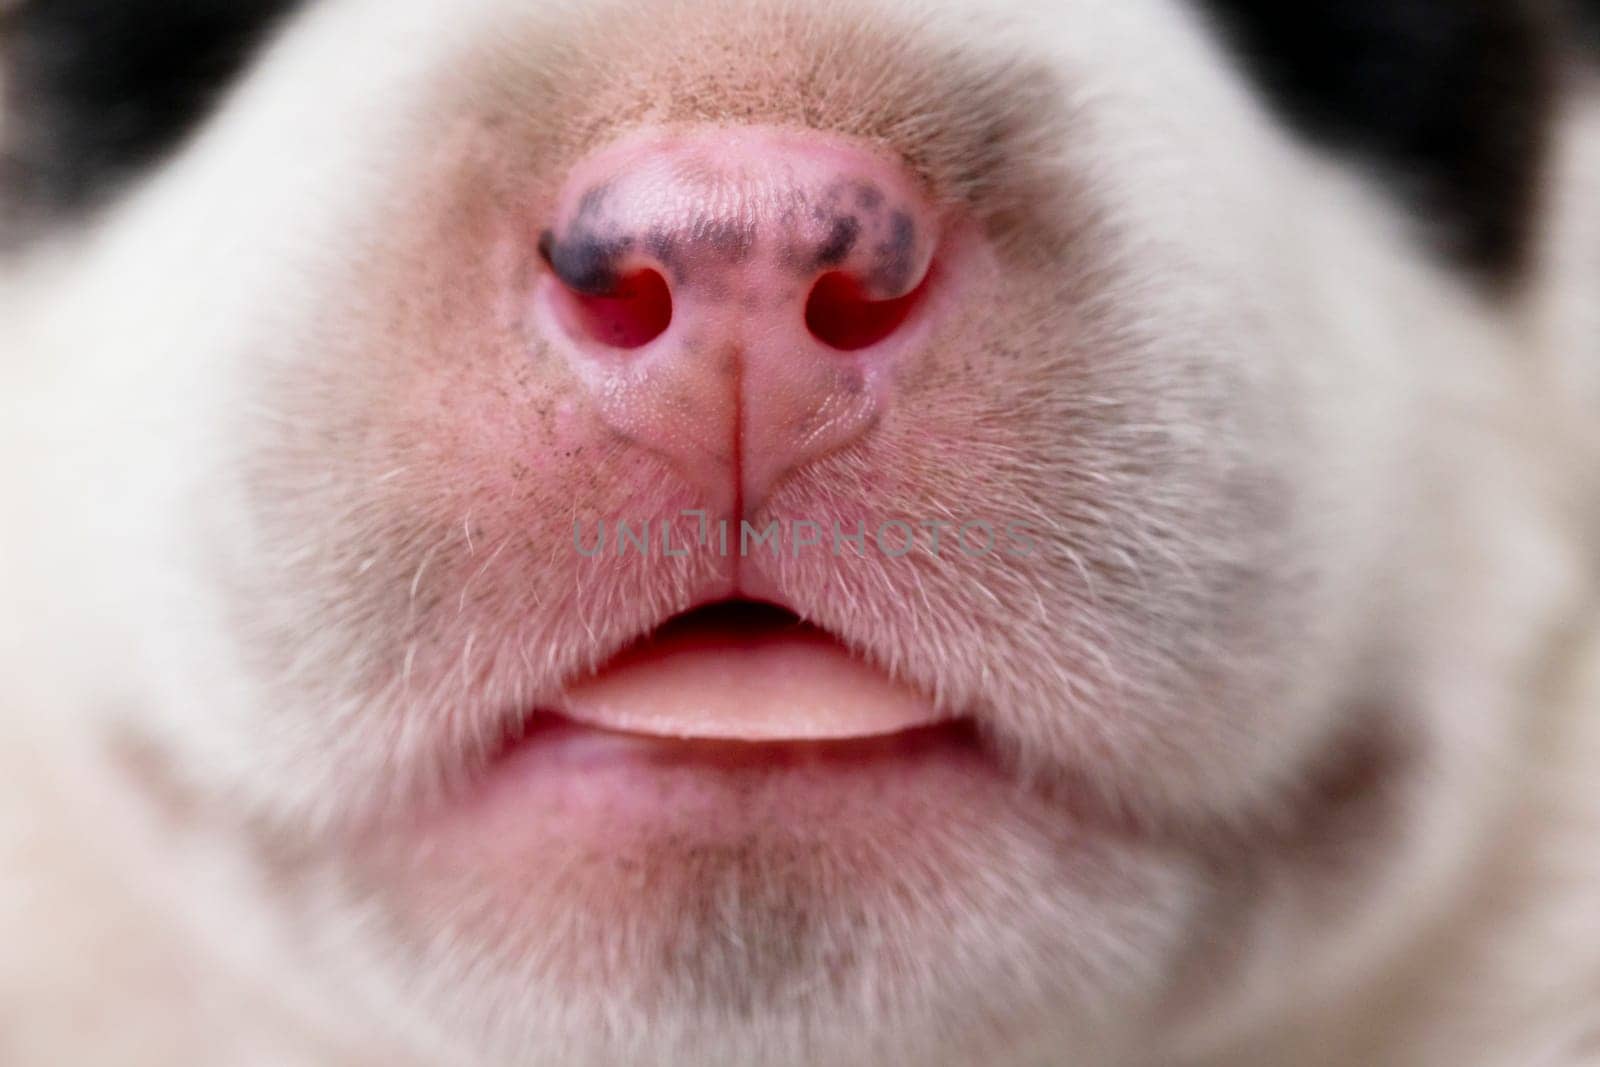 Close-Up of Dog's Snout and Mouth by andreyz